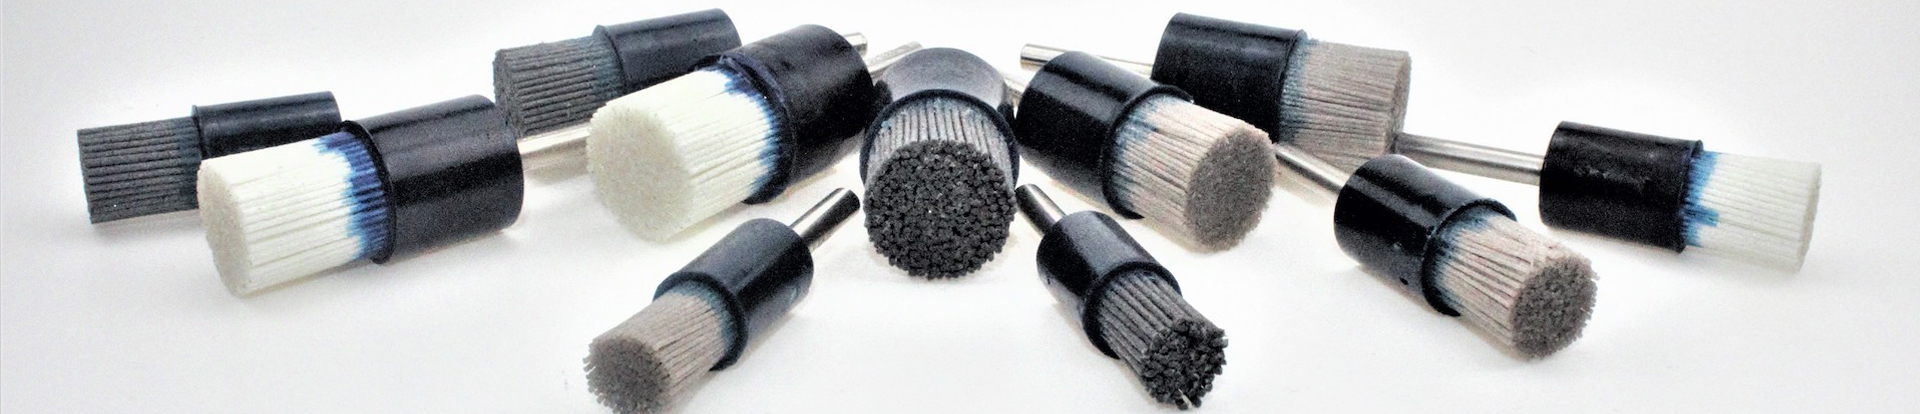 Distinguish the Types and Uses of Industrial Brushes from the Manufacturing Process